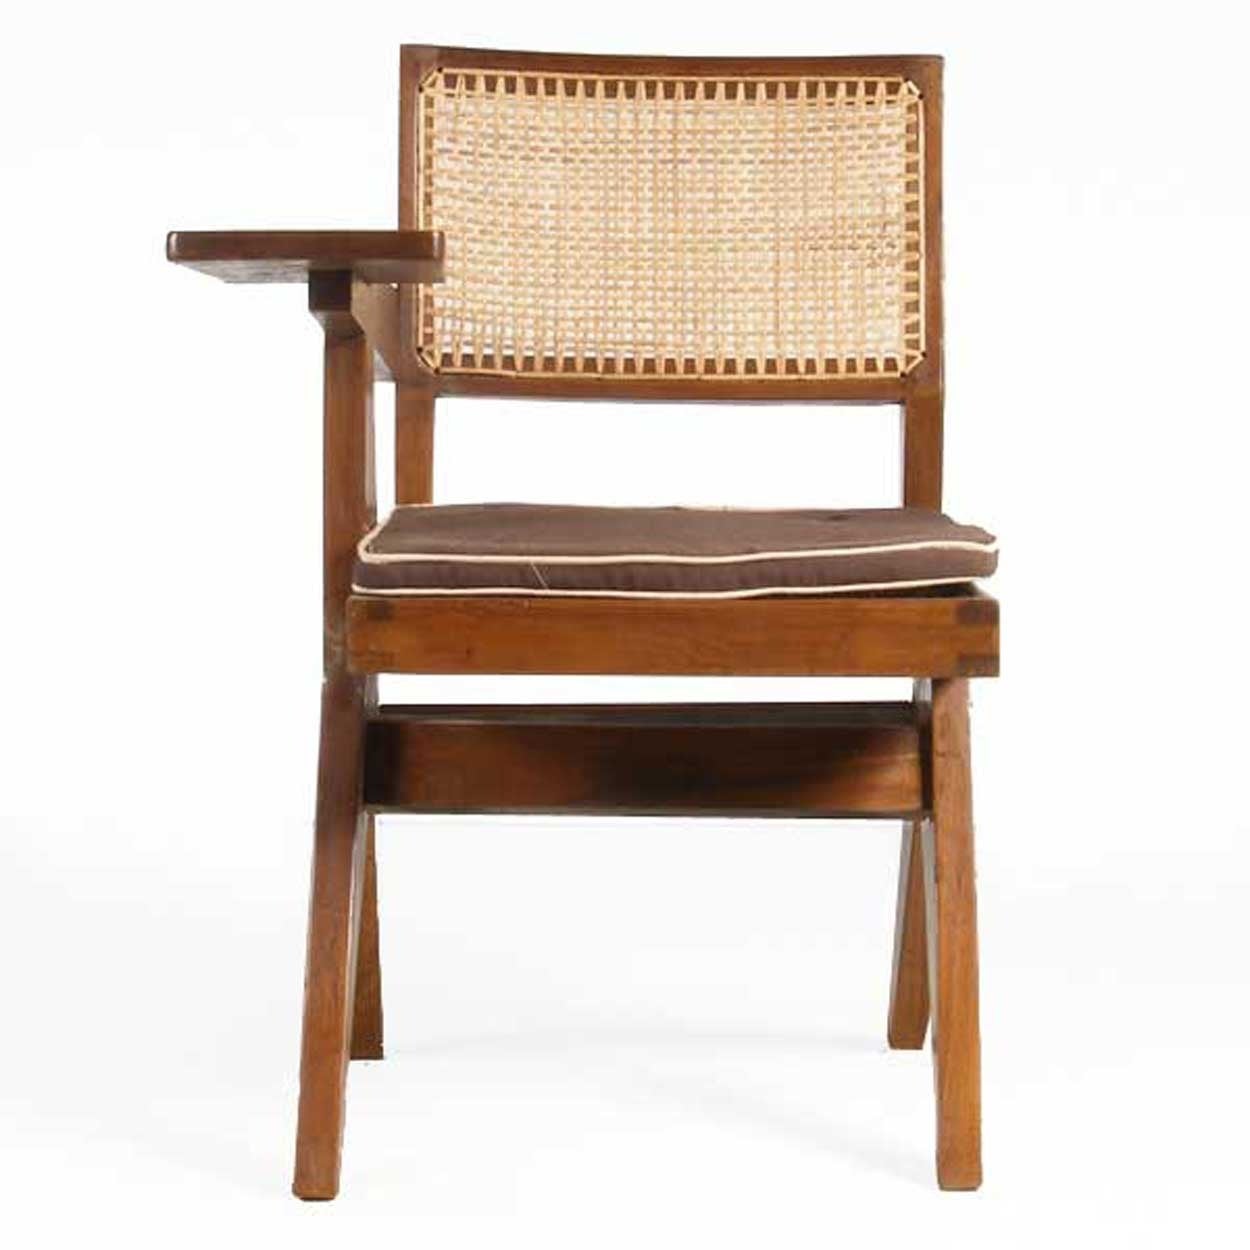 (Swiss, 1896-1967).
This Mid-Century Modern chair has a solid teak frame, with a low, caned backrest and seat, a tablet desk arm and is raised on scissor legs with a double stretcher.

Biography:
Architect and furniture designer Pierre Jeanneret